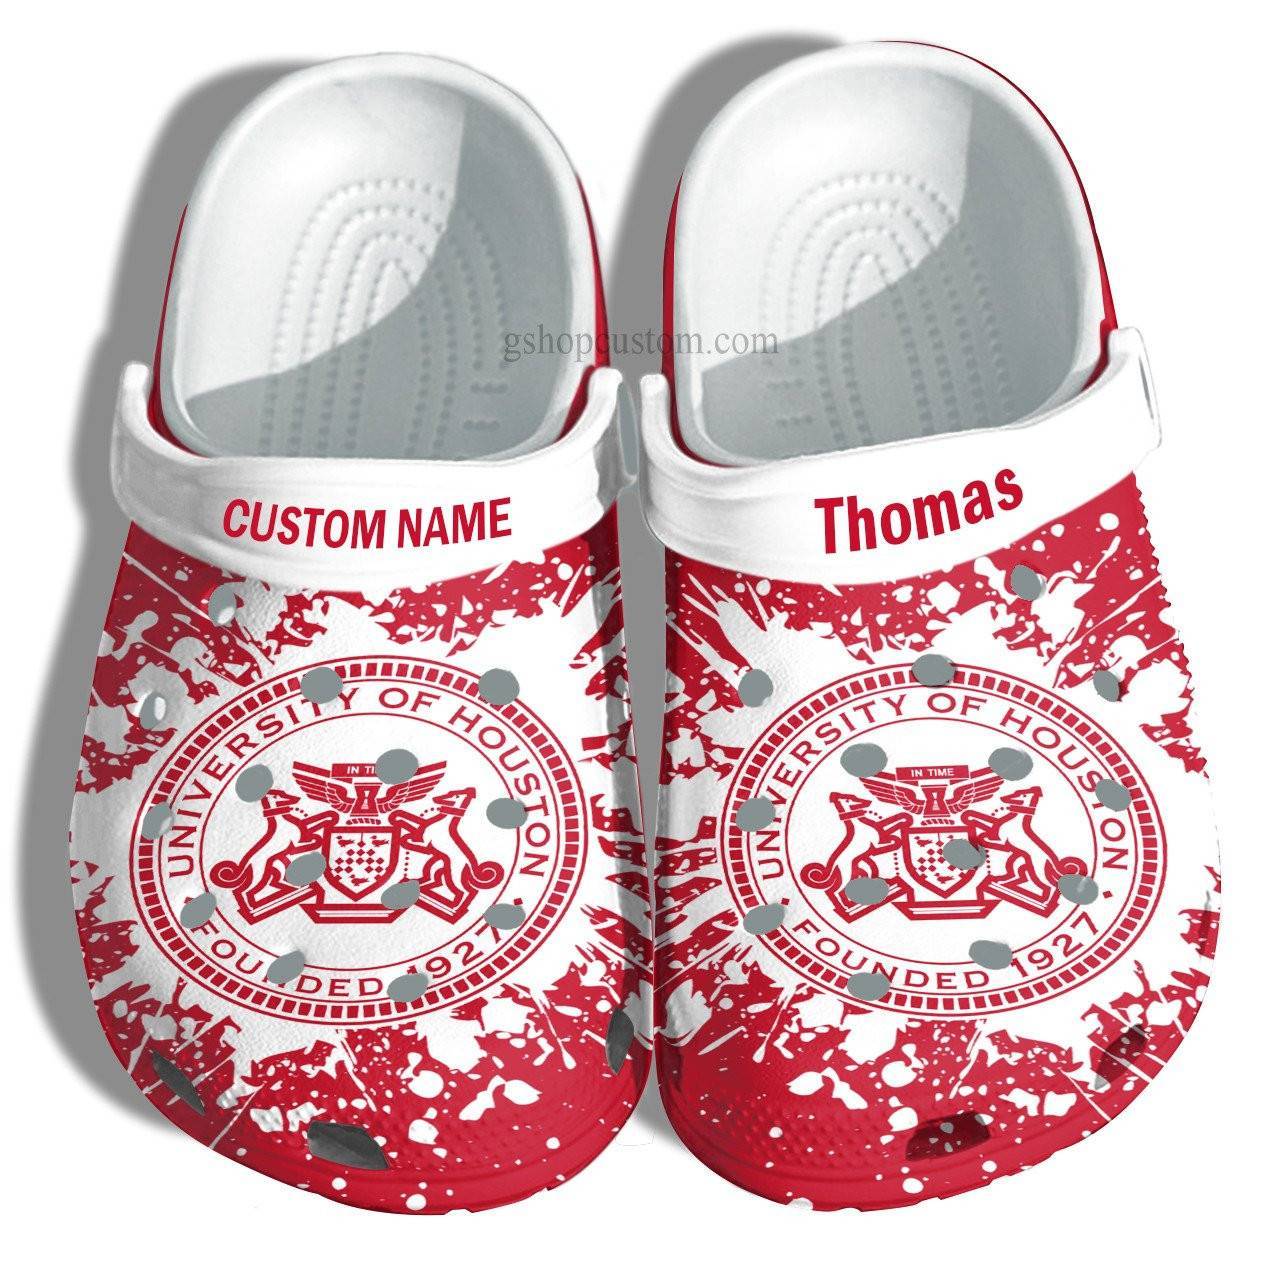 University Of Houston Graduation Gifts Croc Shoes Customize – Admission Gift Crocss Shoes